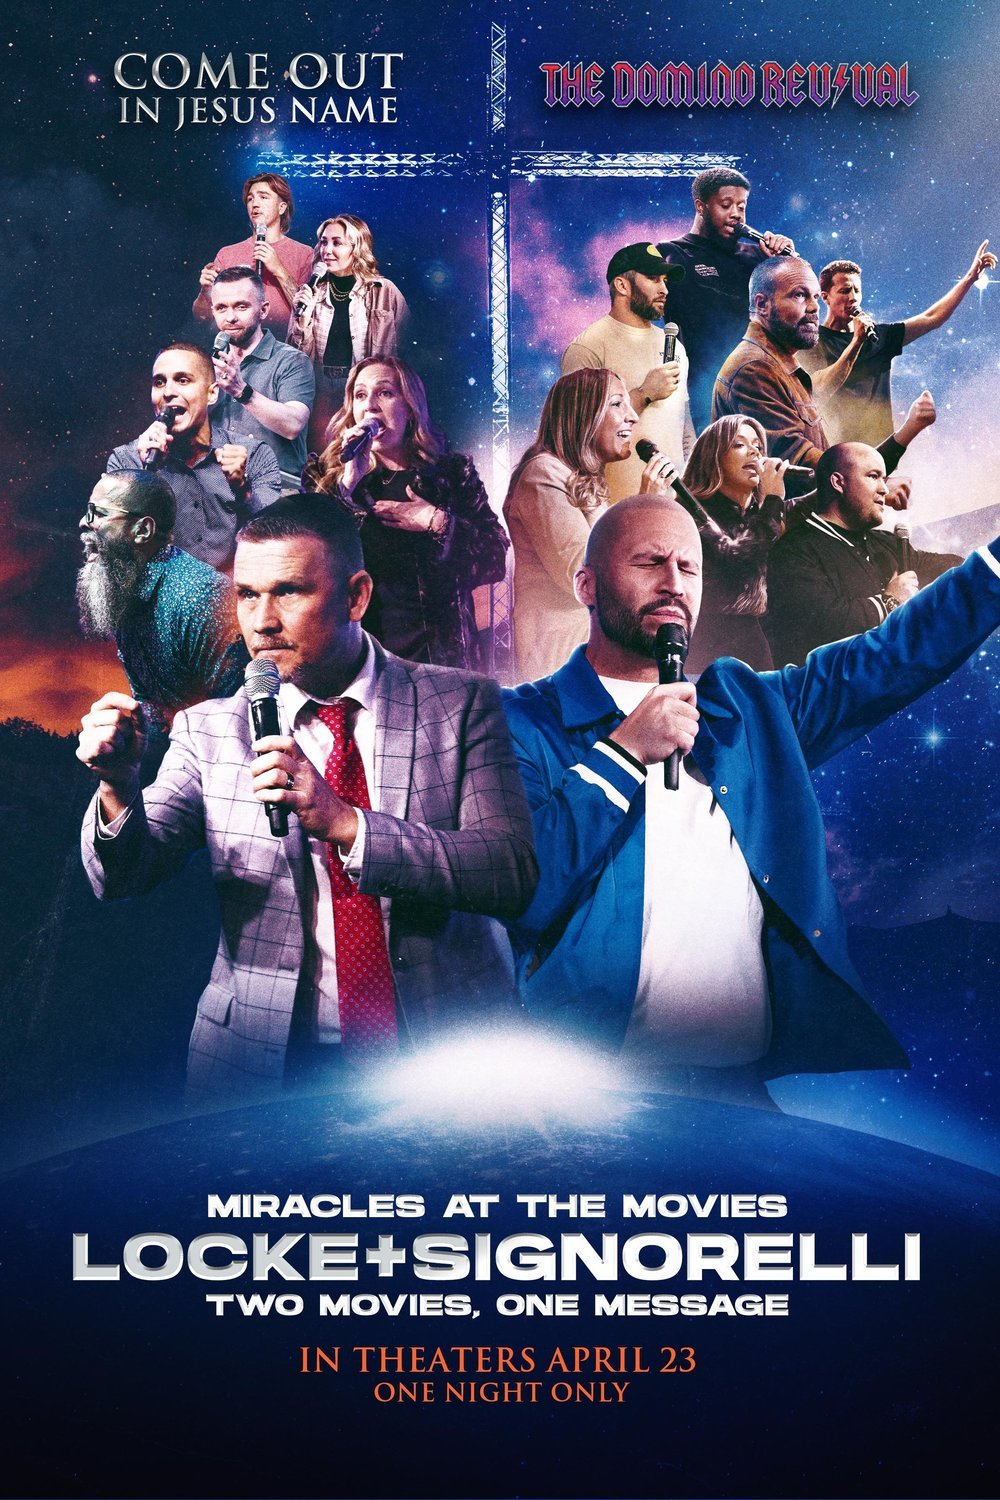 L'affiche du film Miracles at the Movies: Locke + Signorelli